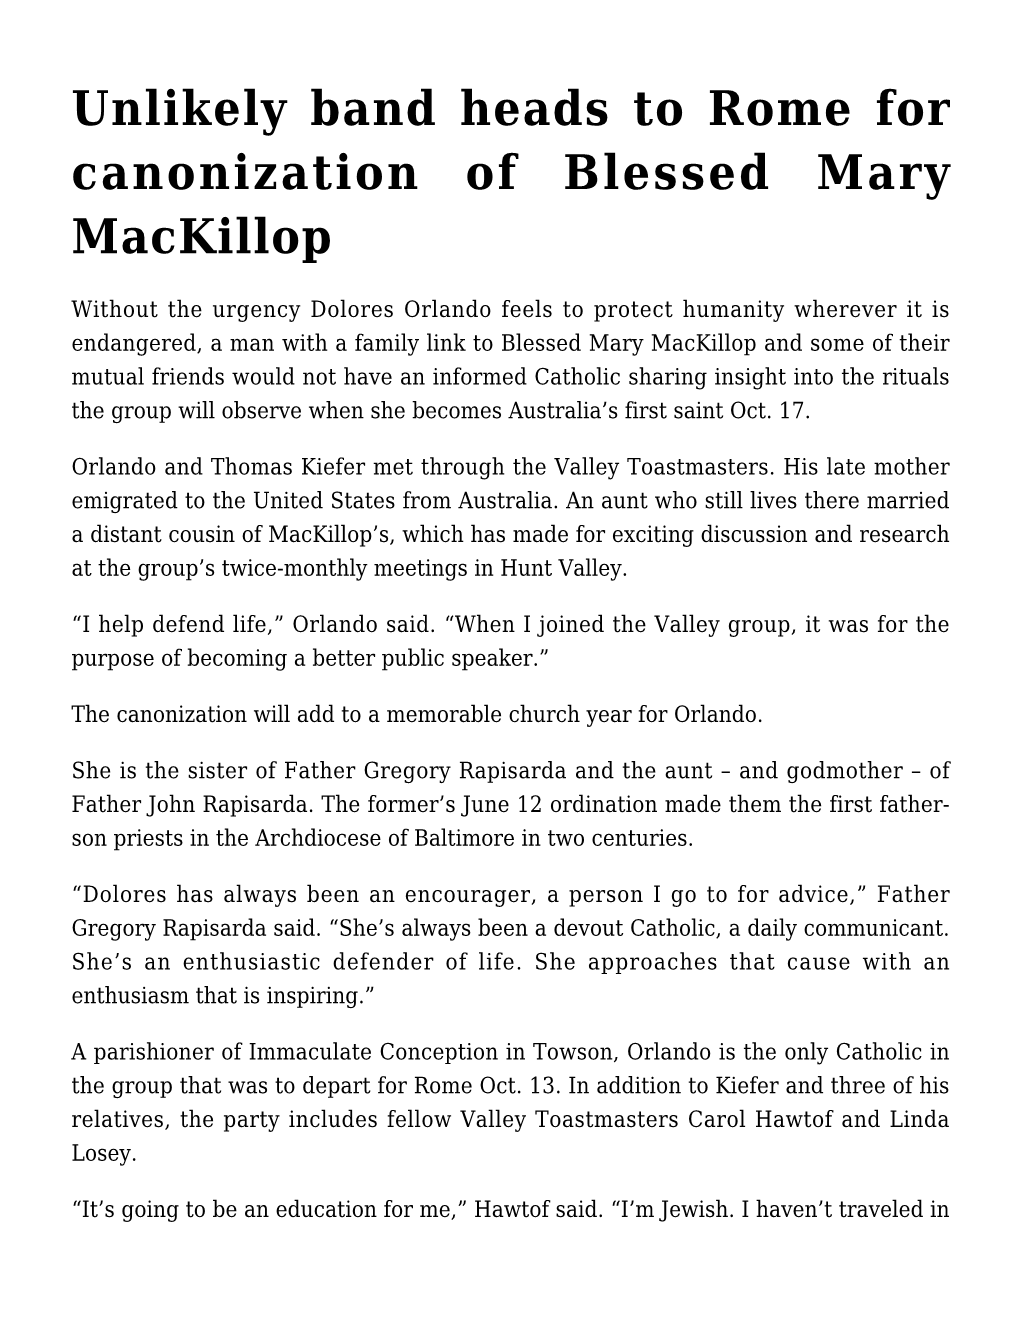 Unlikely Band Heads to Rome for Canonization of Blessed Mary Mackillop